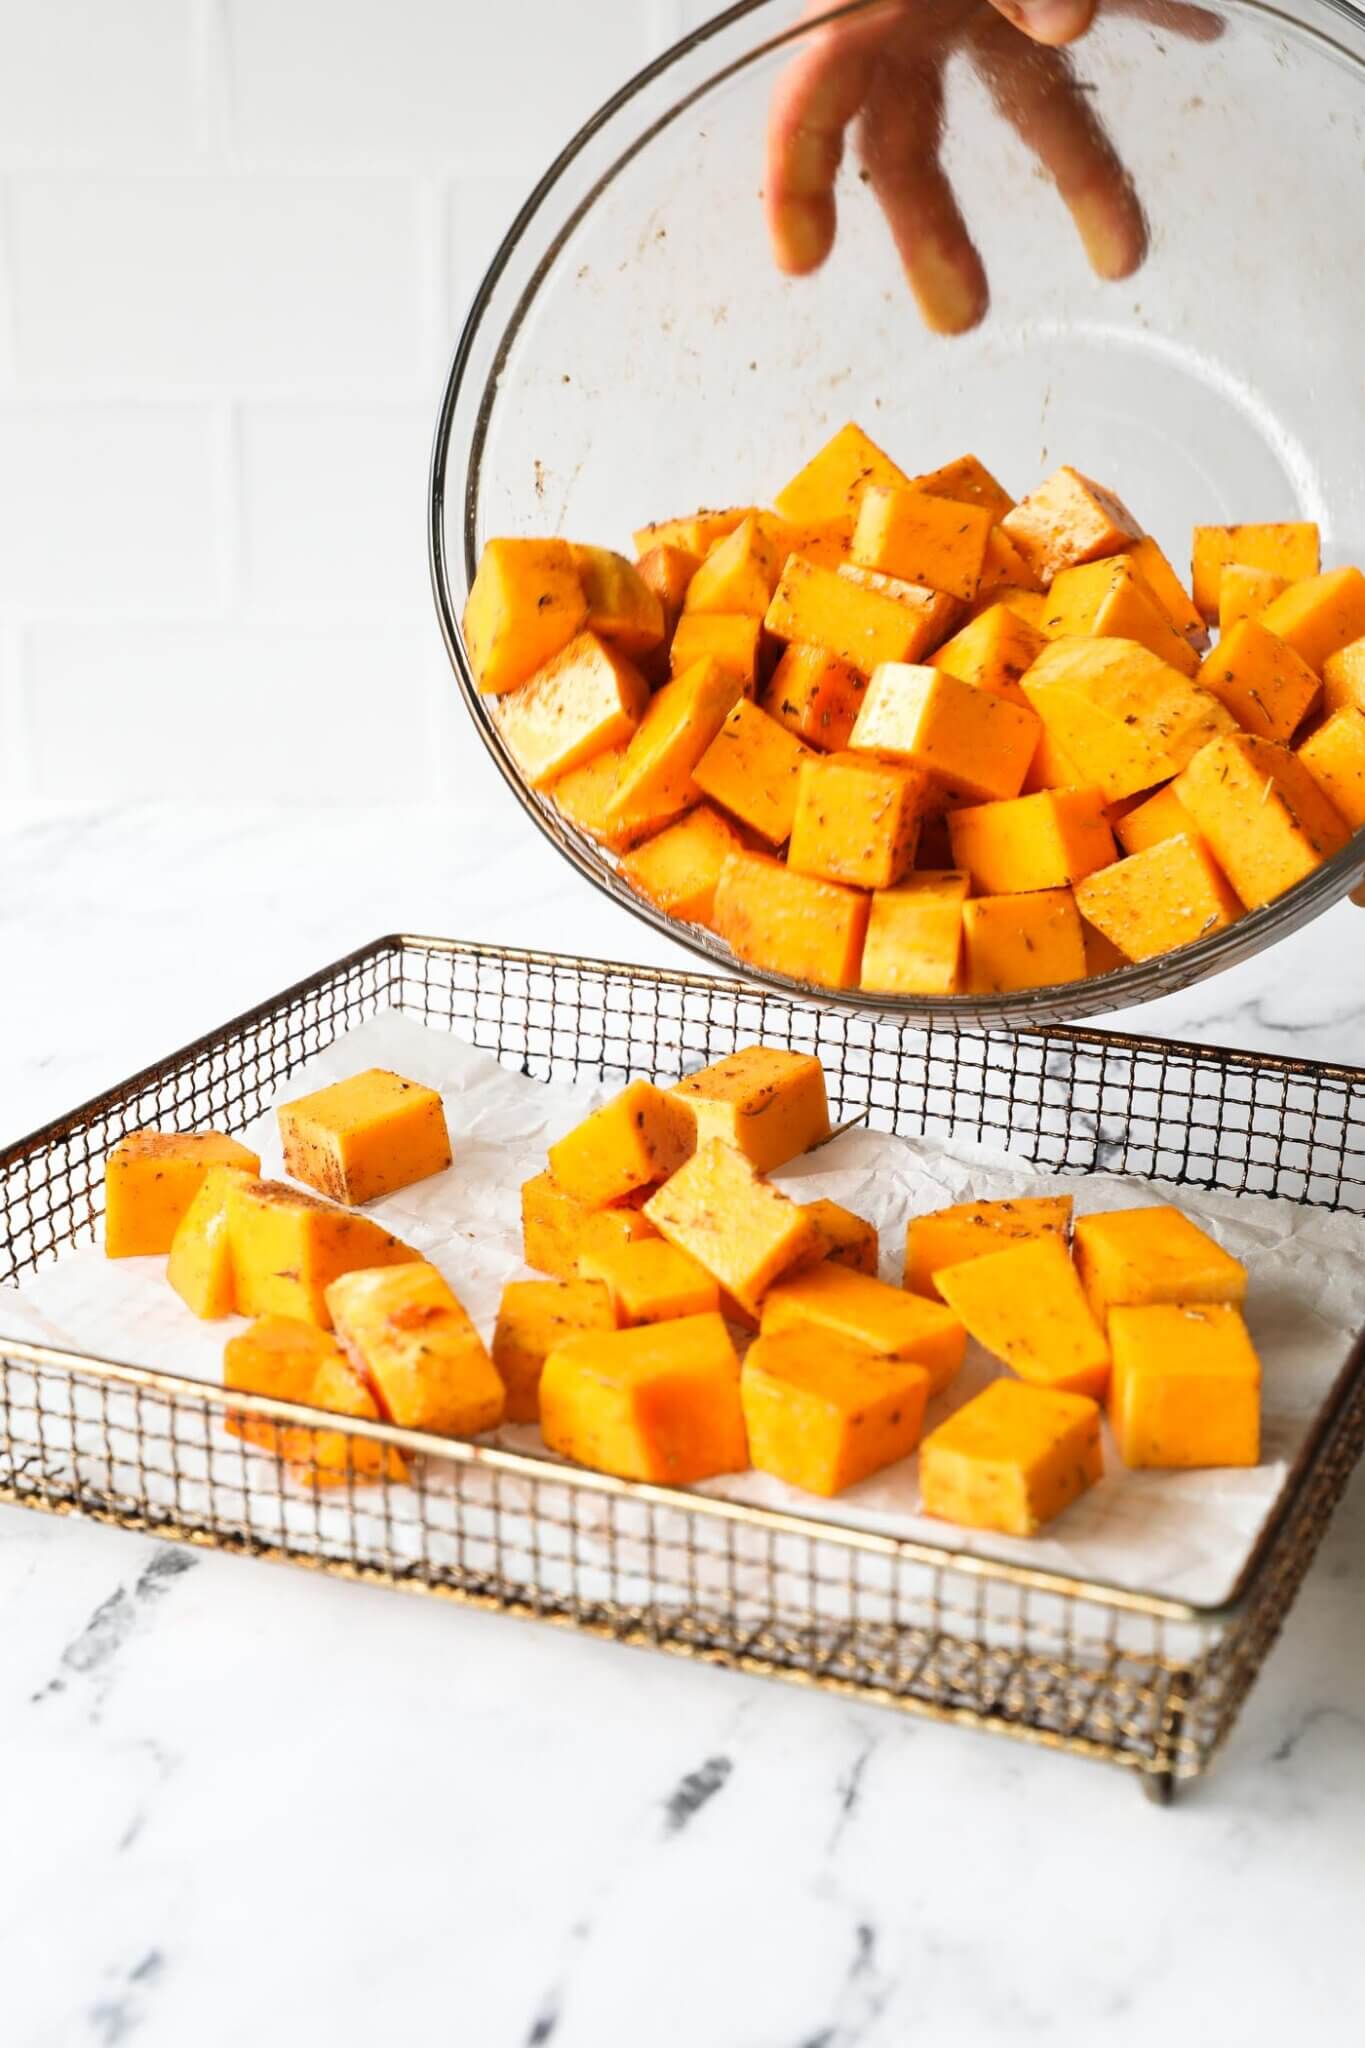 Tender, Caramelized Air Fryer Butternut Squash Cubes - Real Simple Good